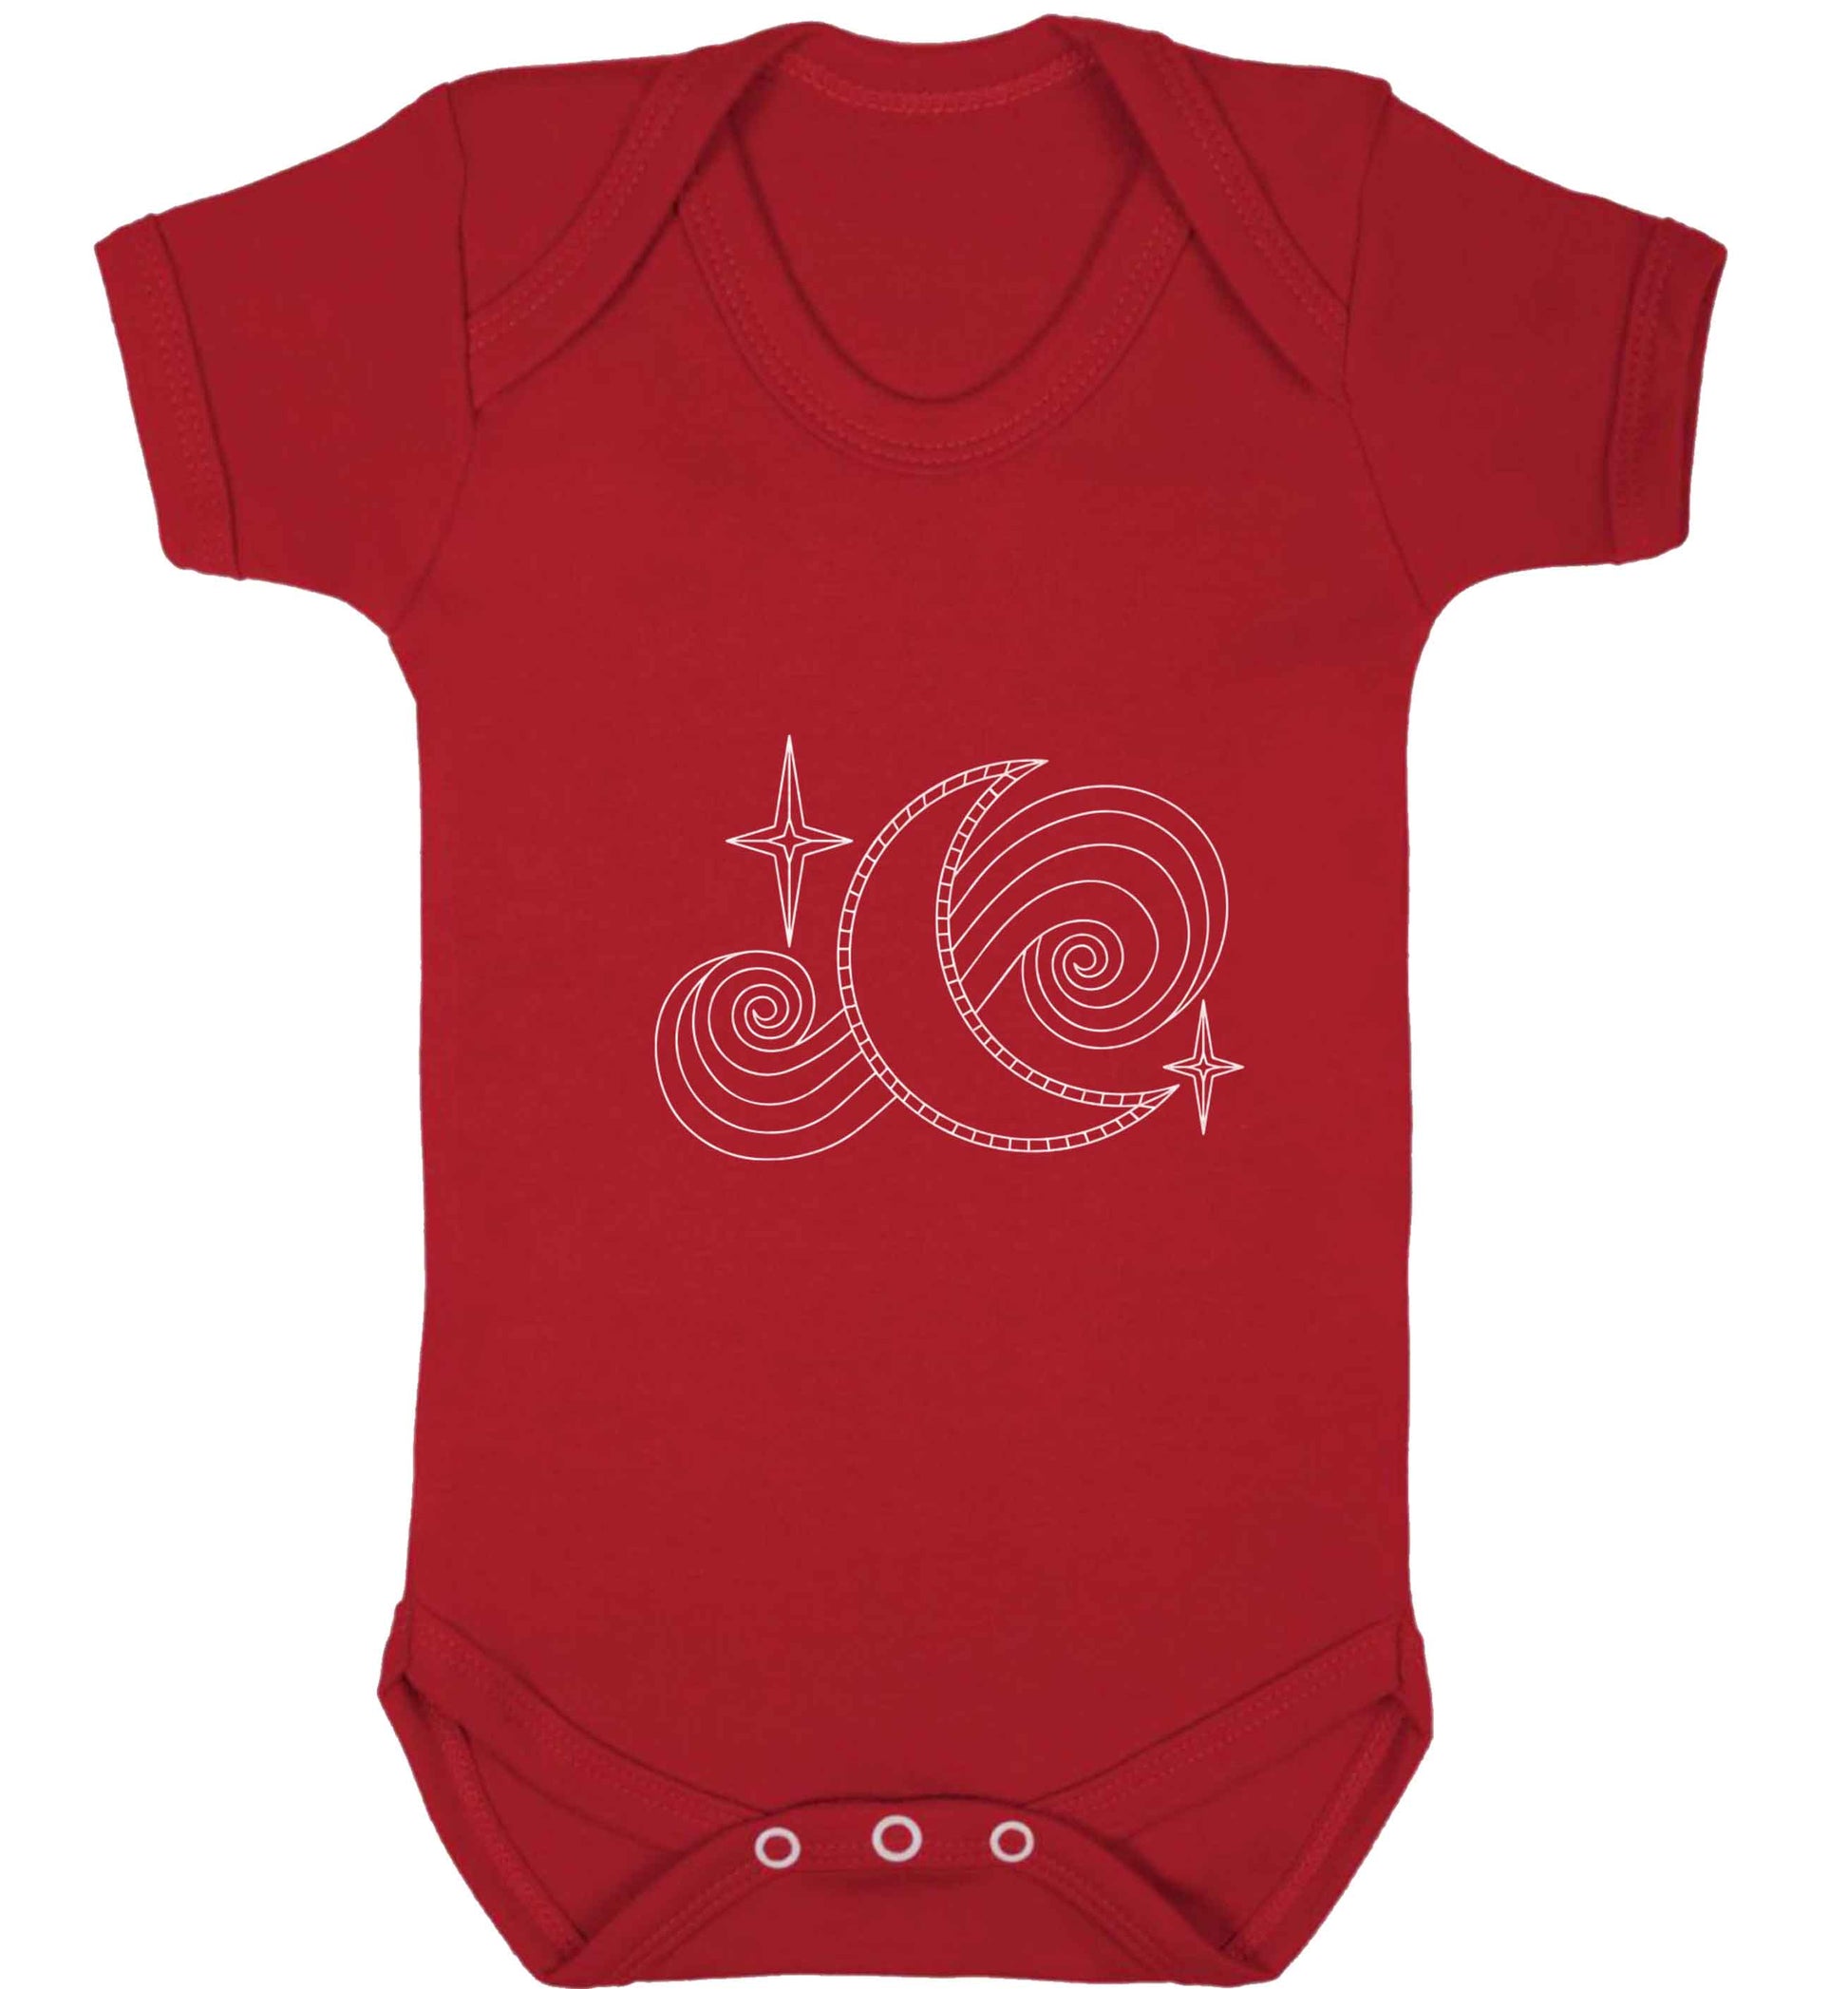 Moon and stars illustration baby vest red 18-24 months